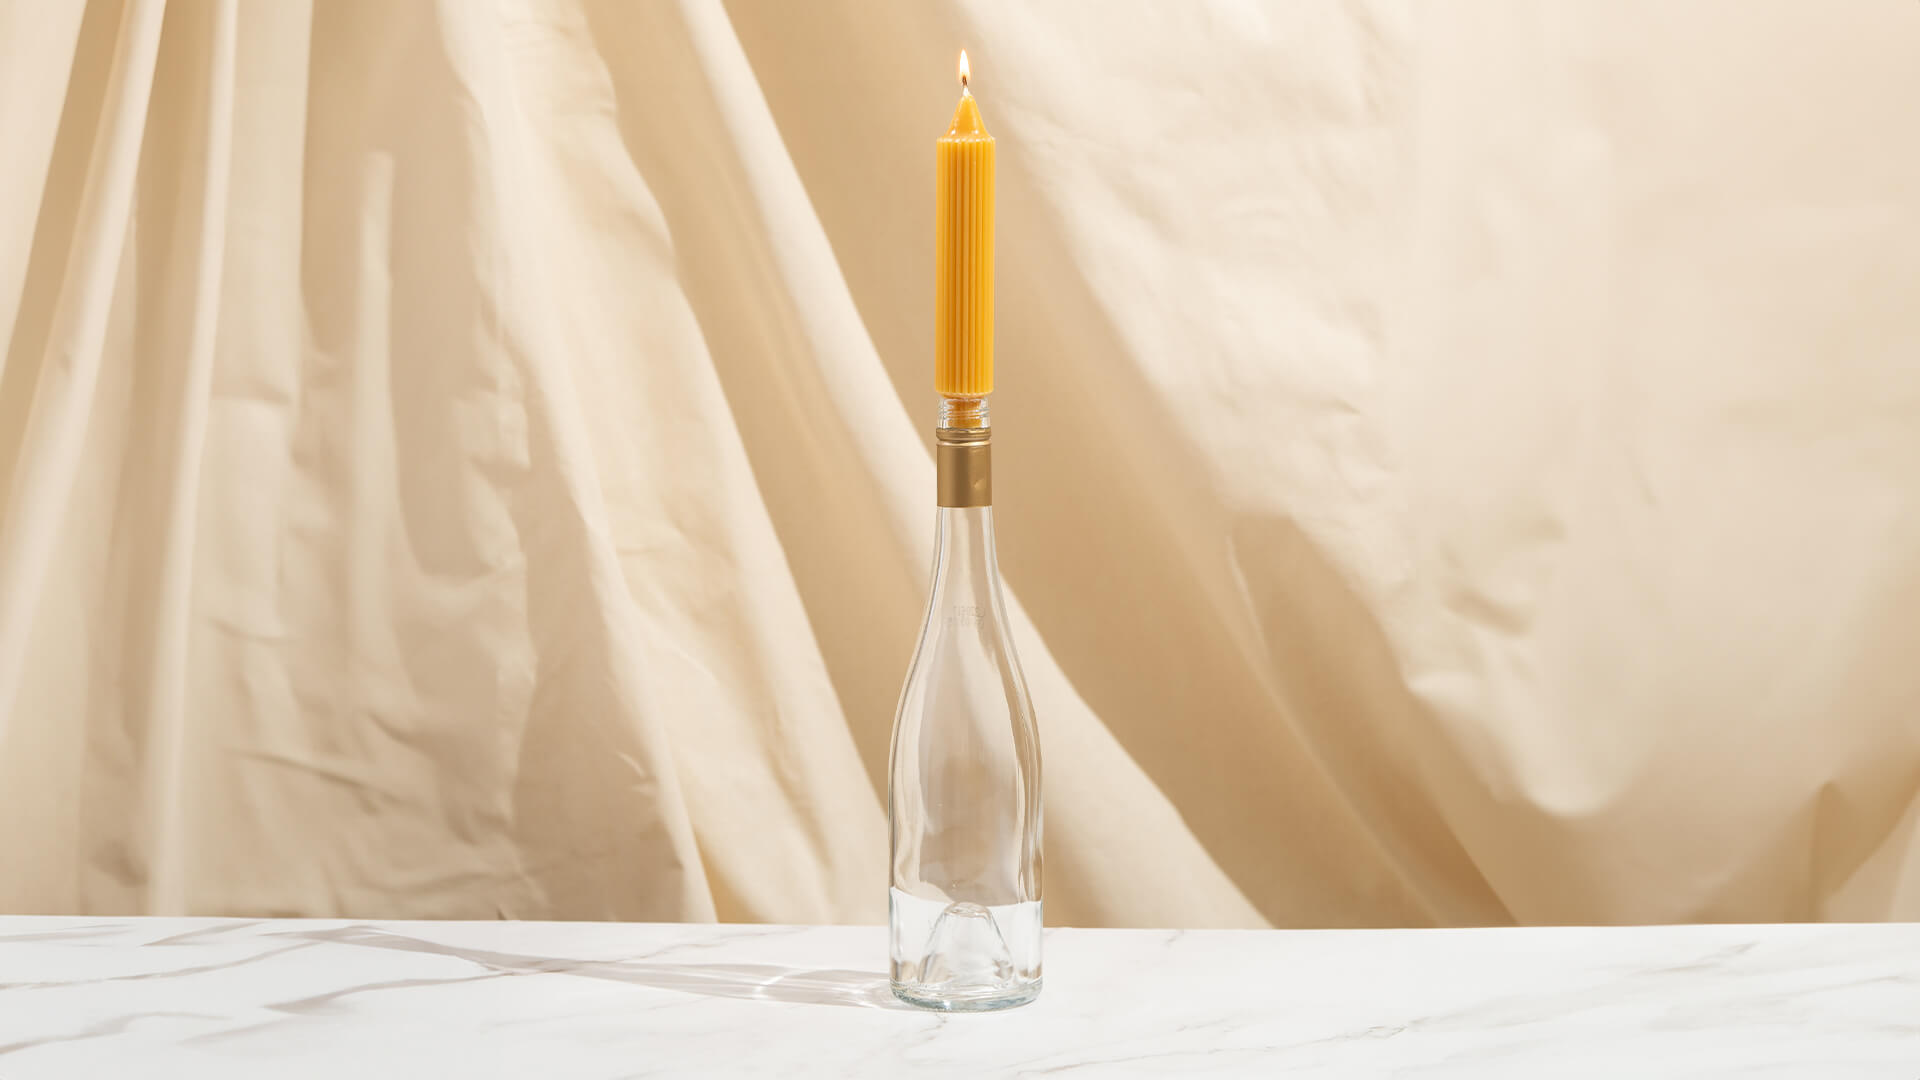 An empty Saintly wine bottle being used as a candle holder.